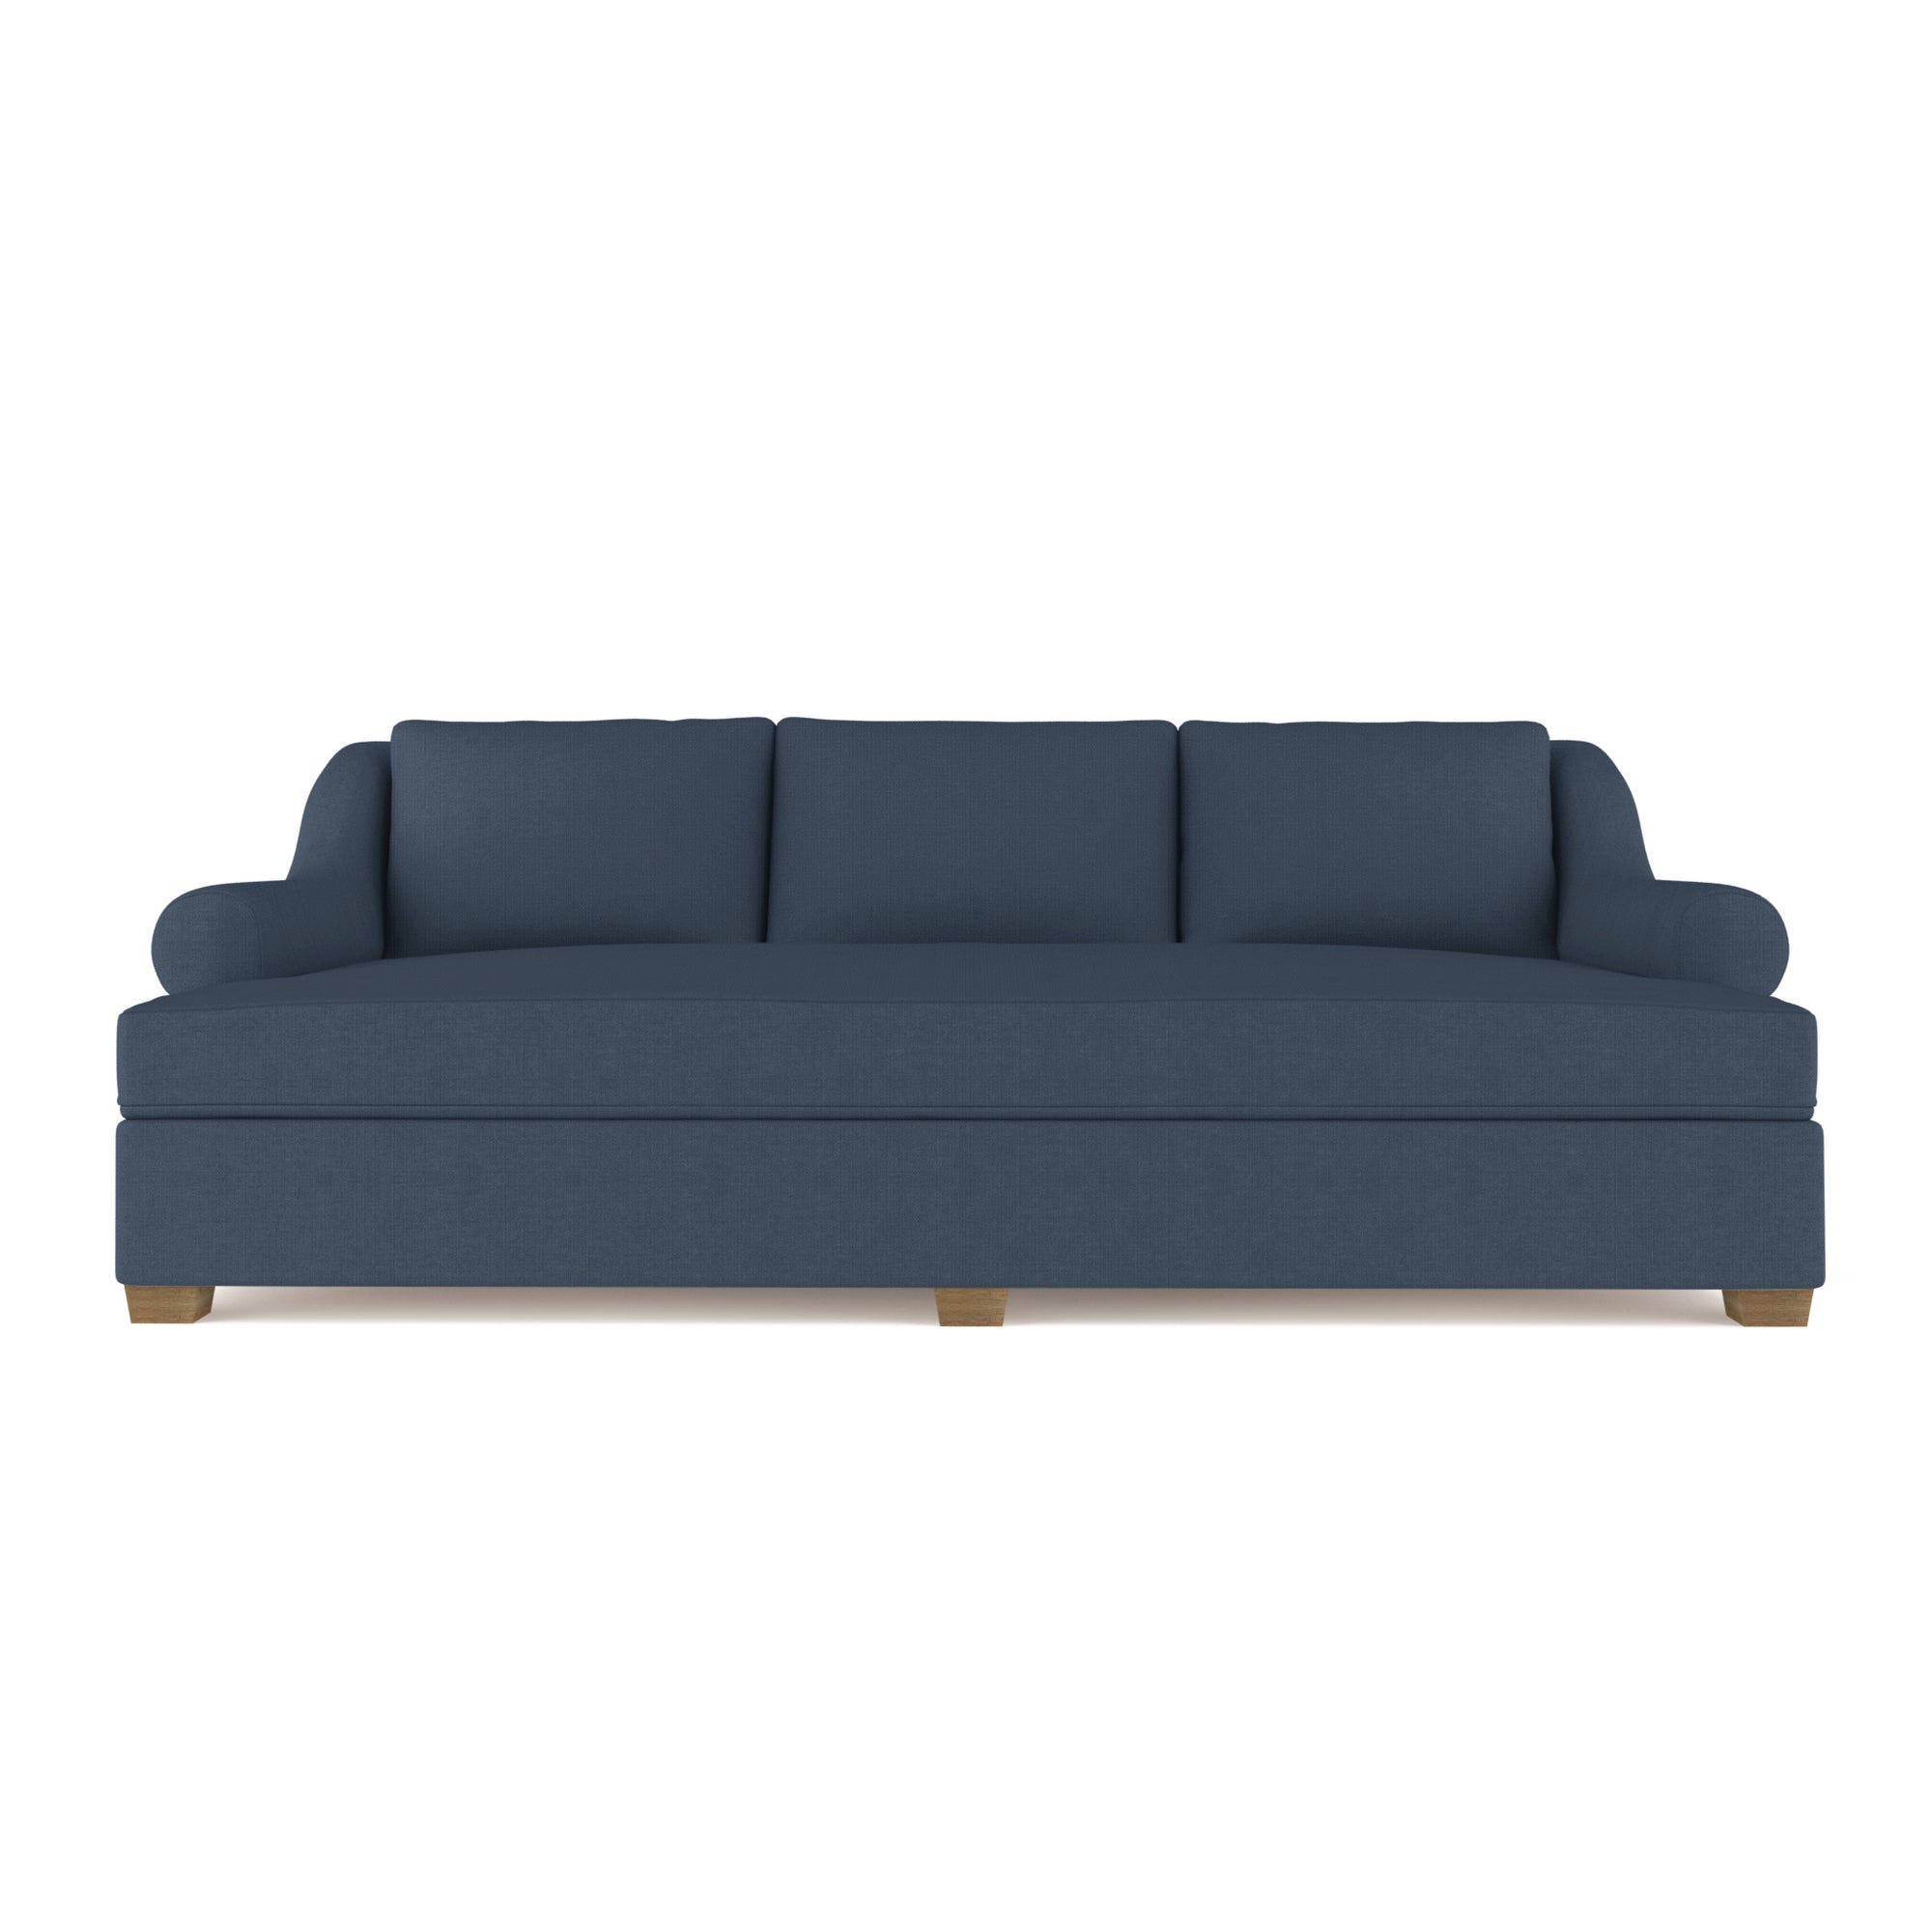 Thompson Daybed - Bluebell Box Weave Linen